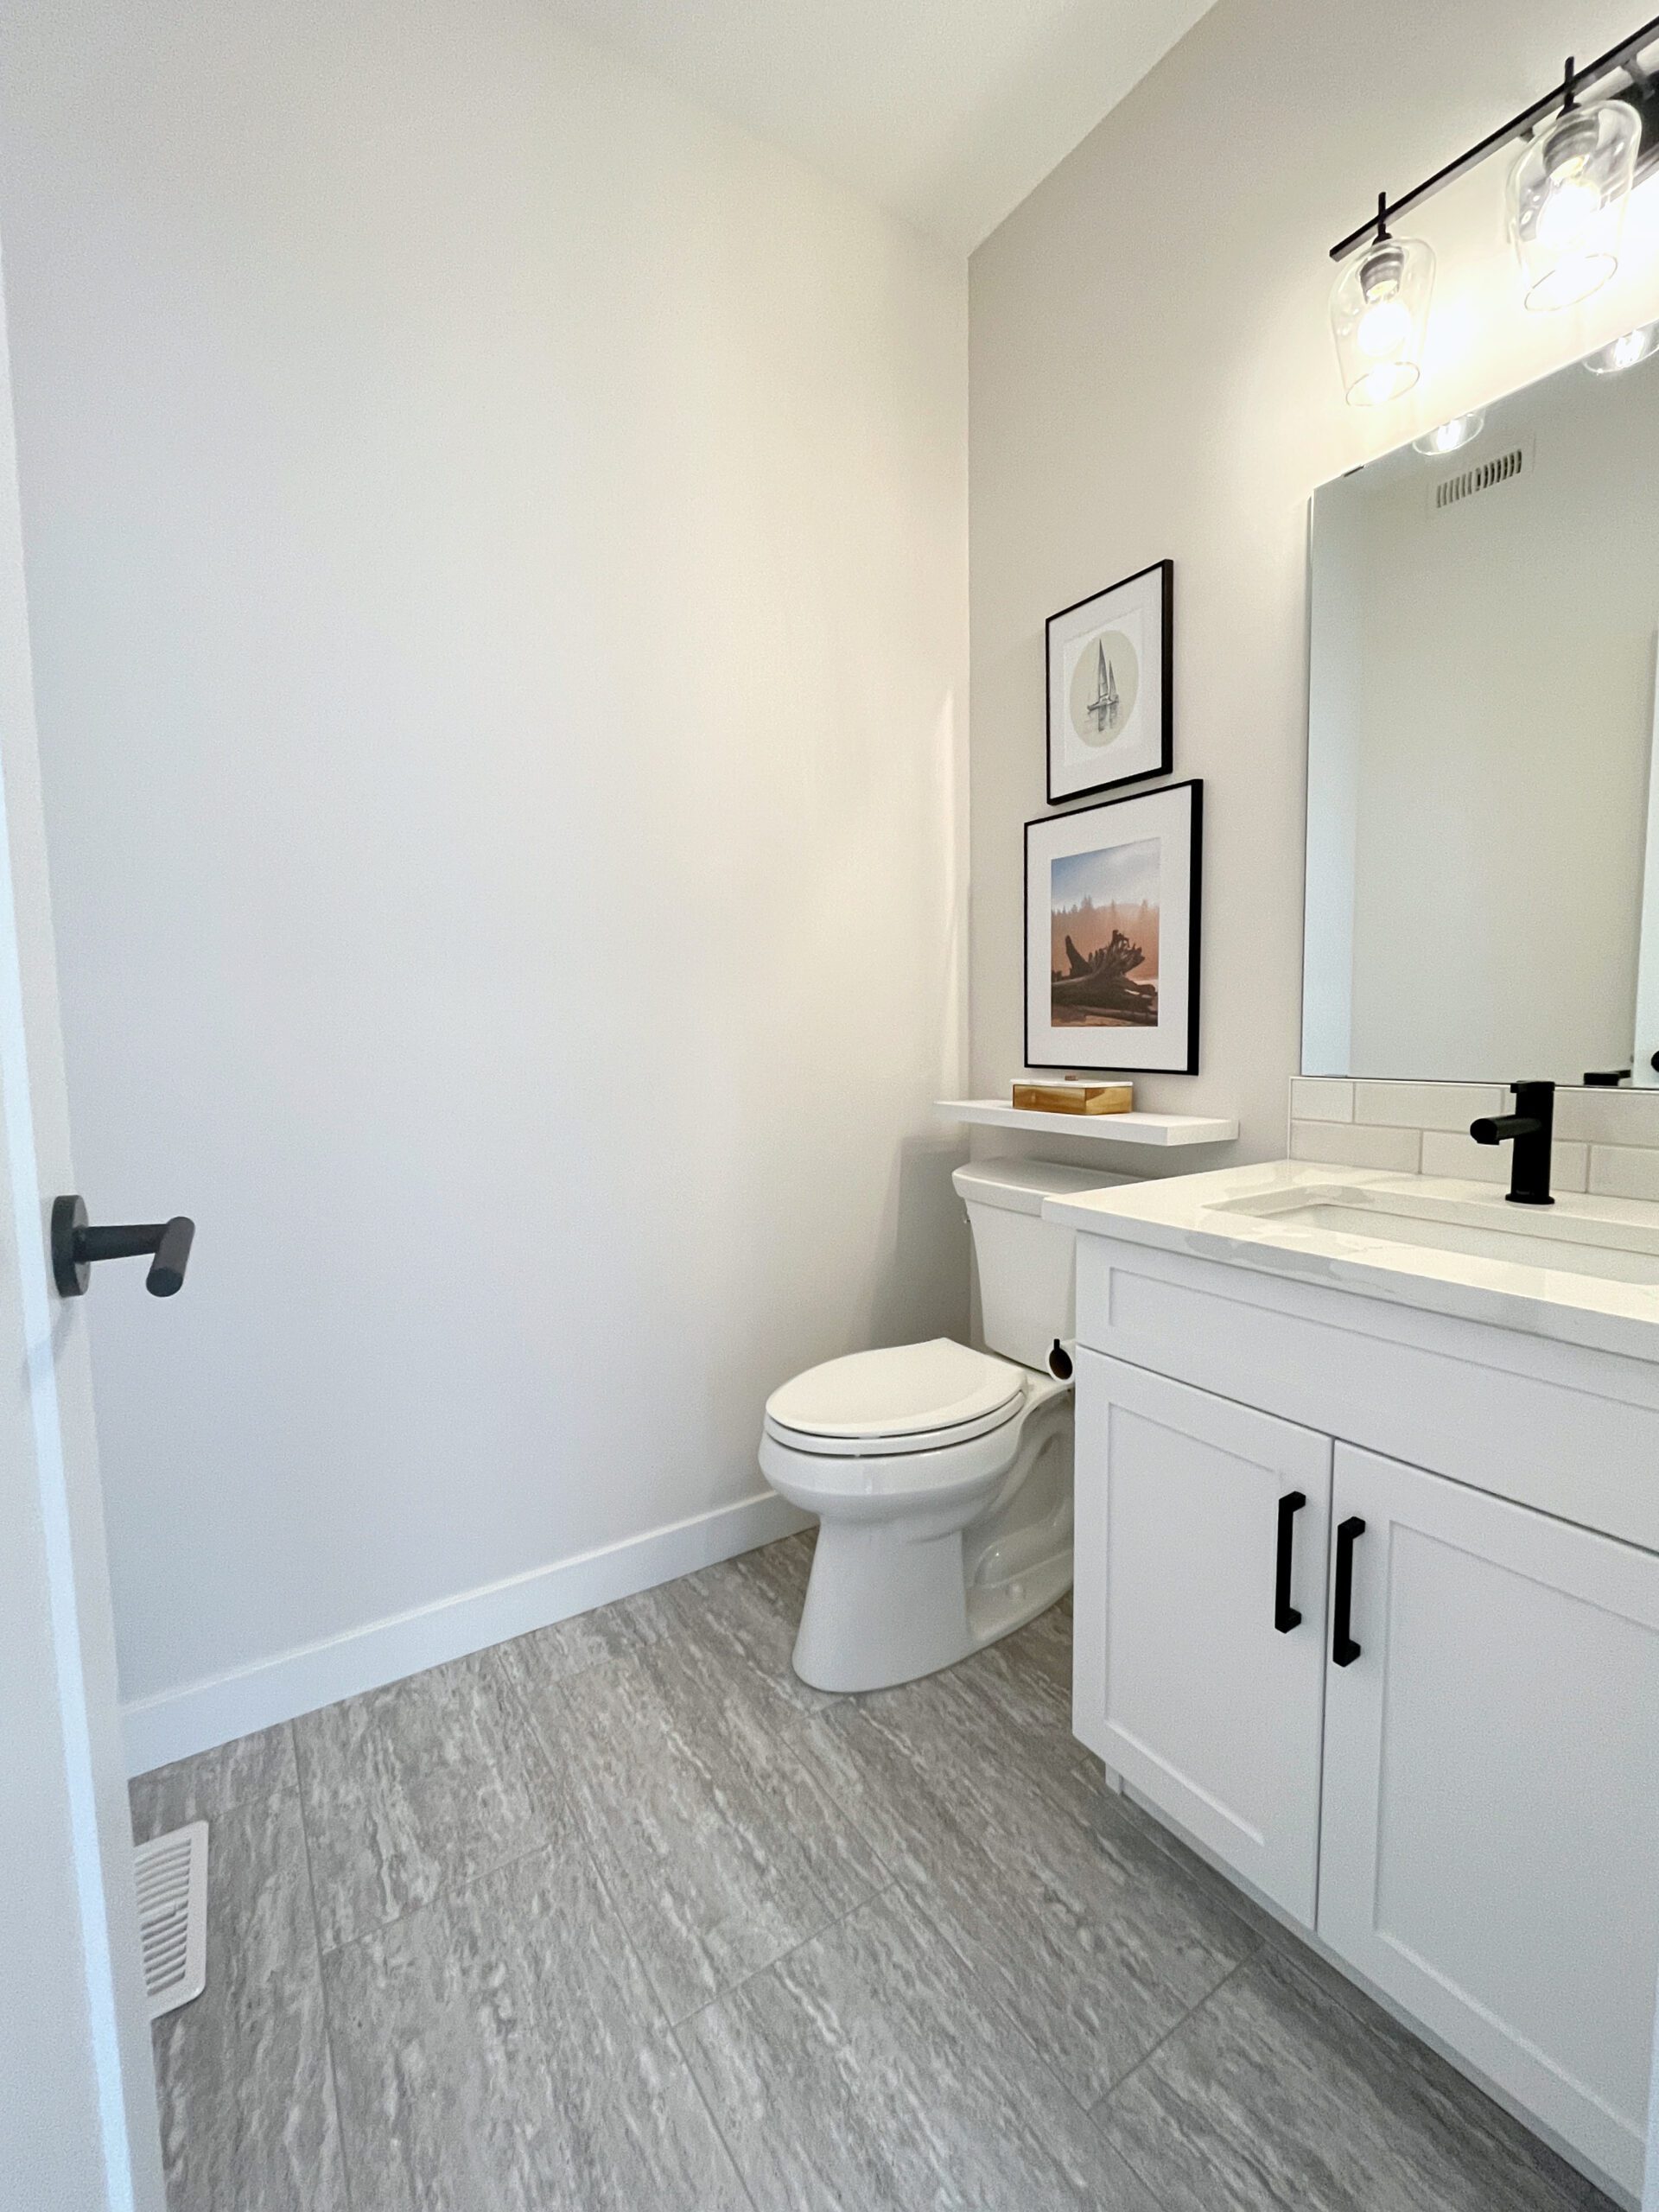 A two-storey home in Pilot Butte with a white bathroom featuring a toilet and sink.